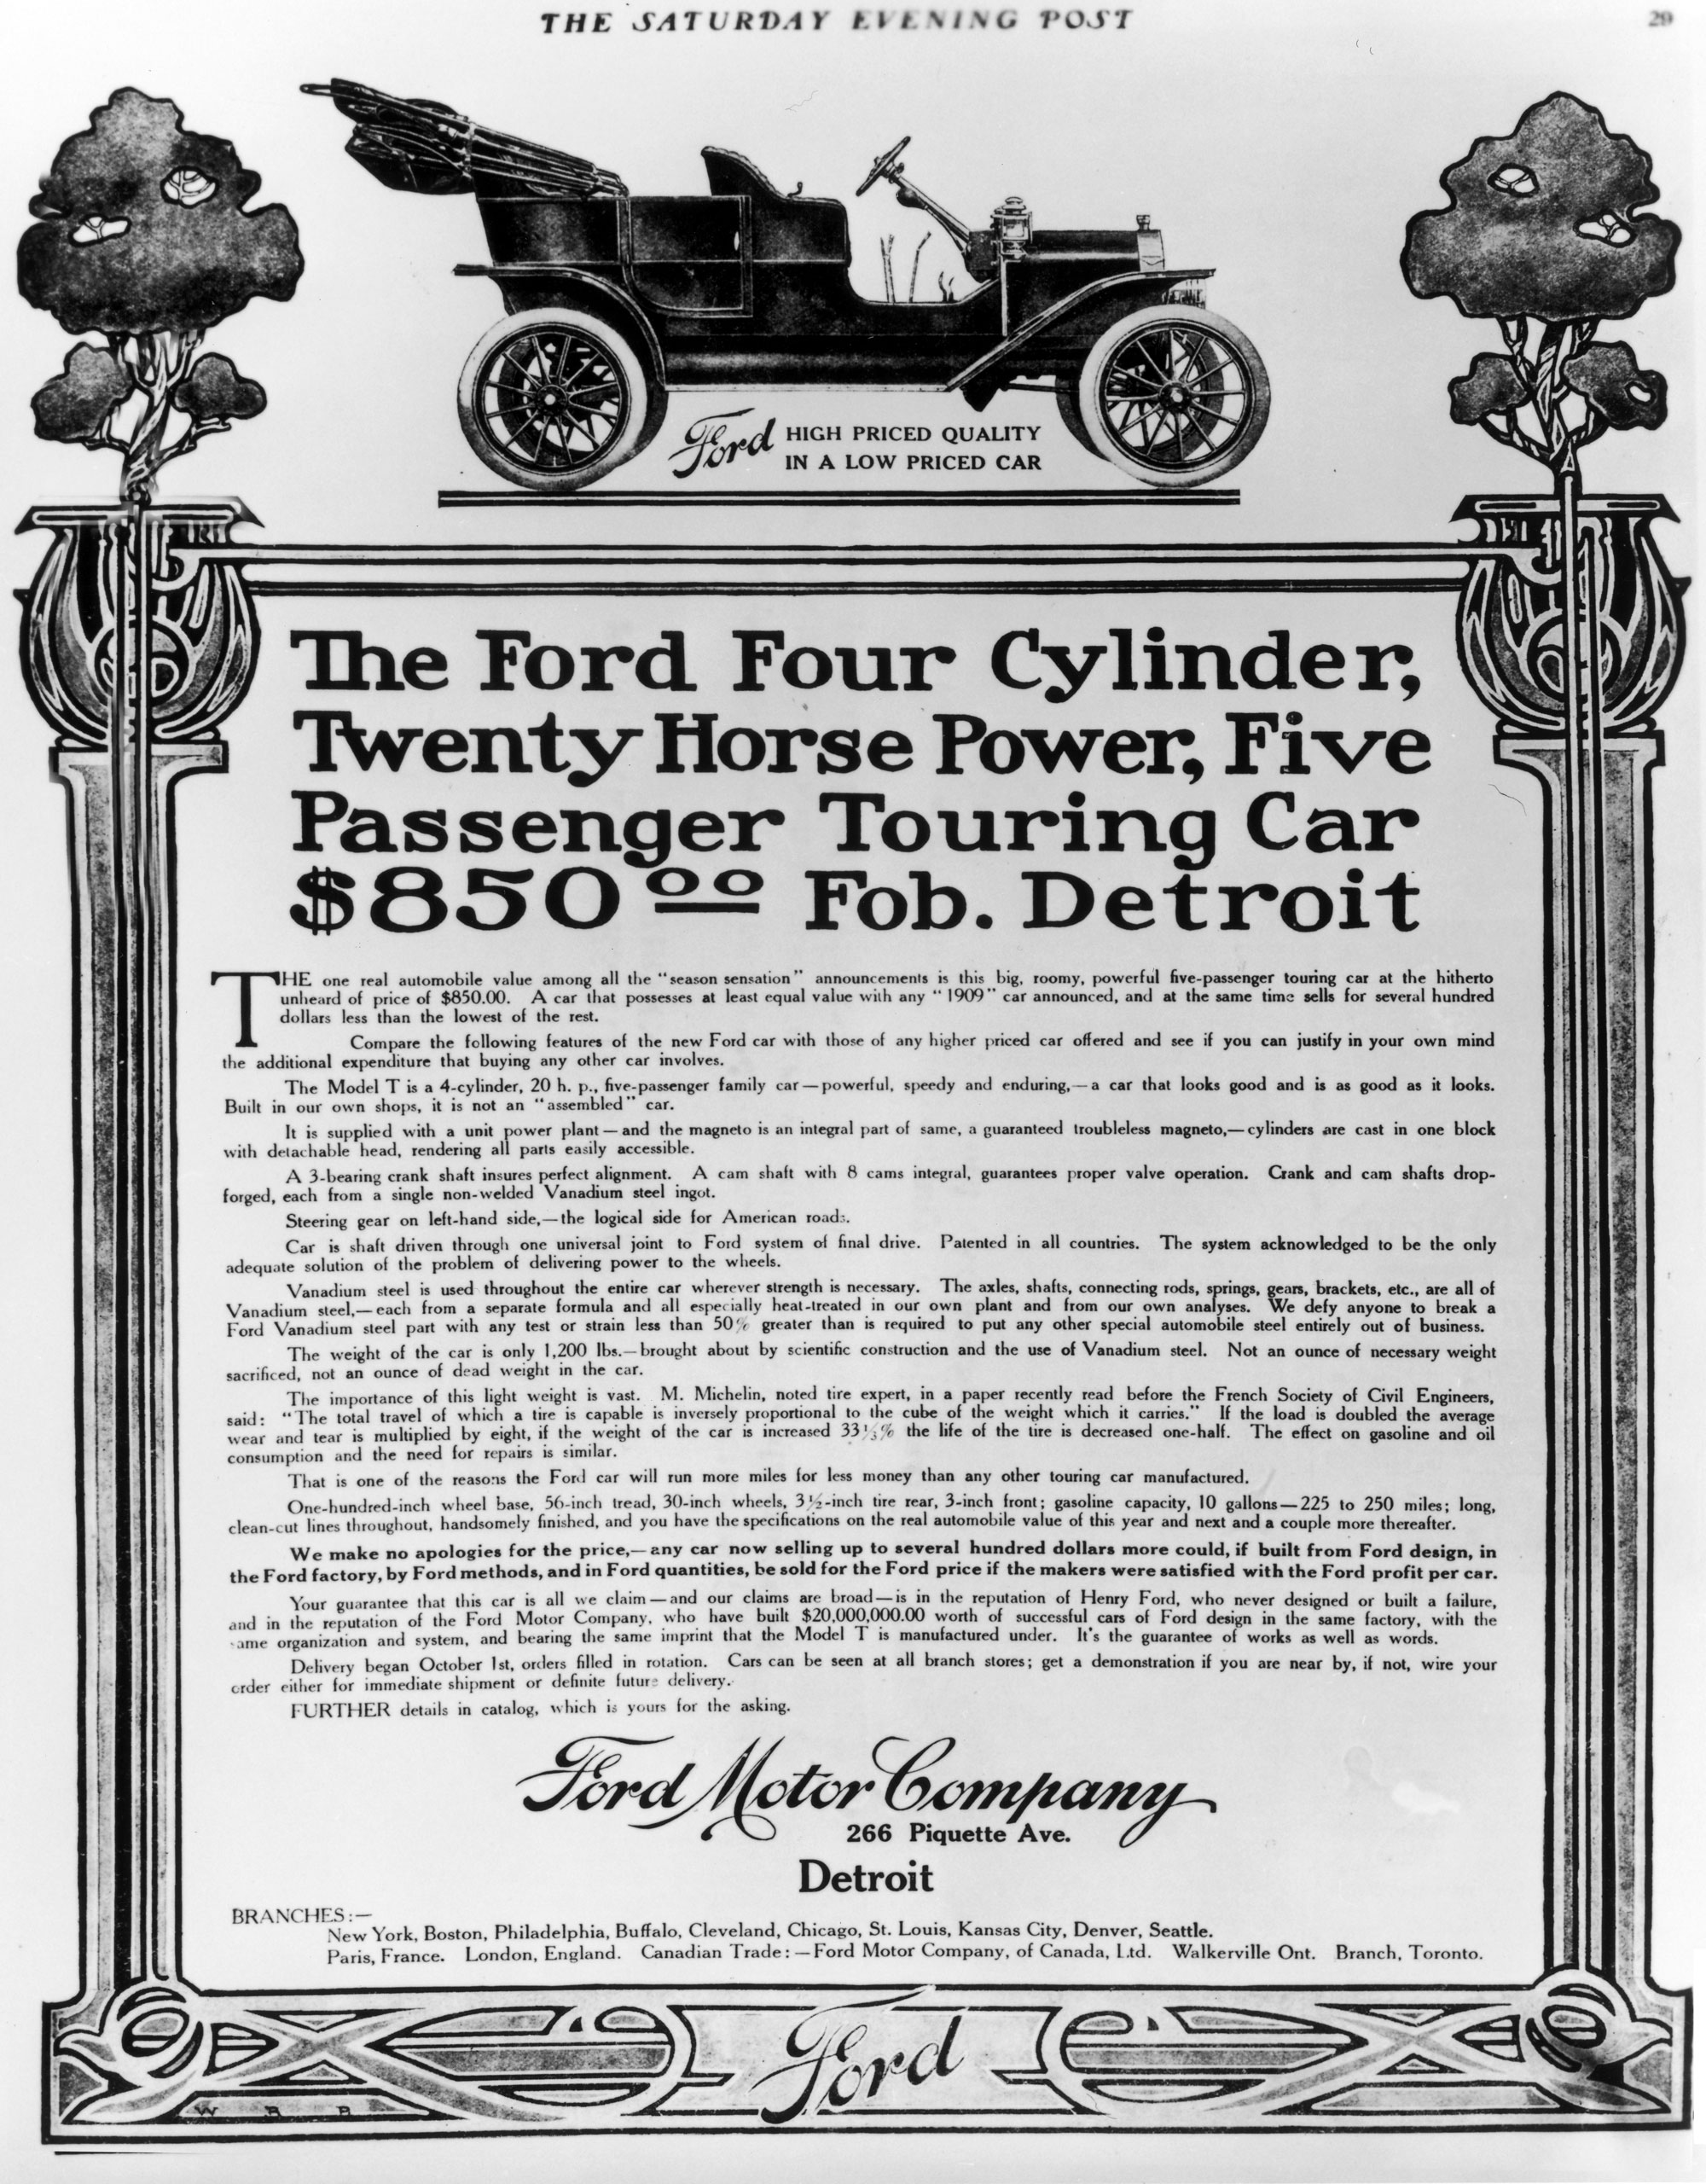 A Ford Advertisement for Model T Automobile, circa 1909.